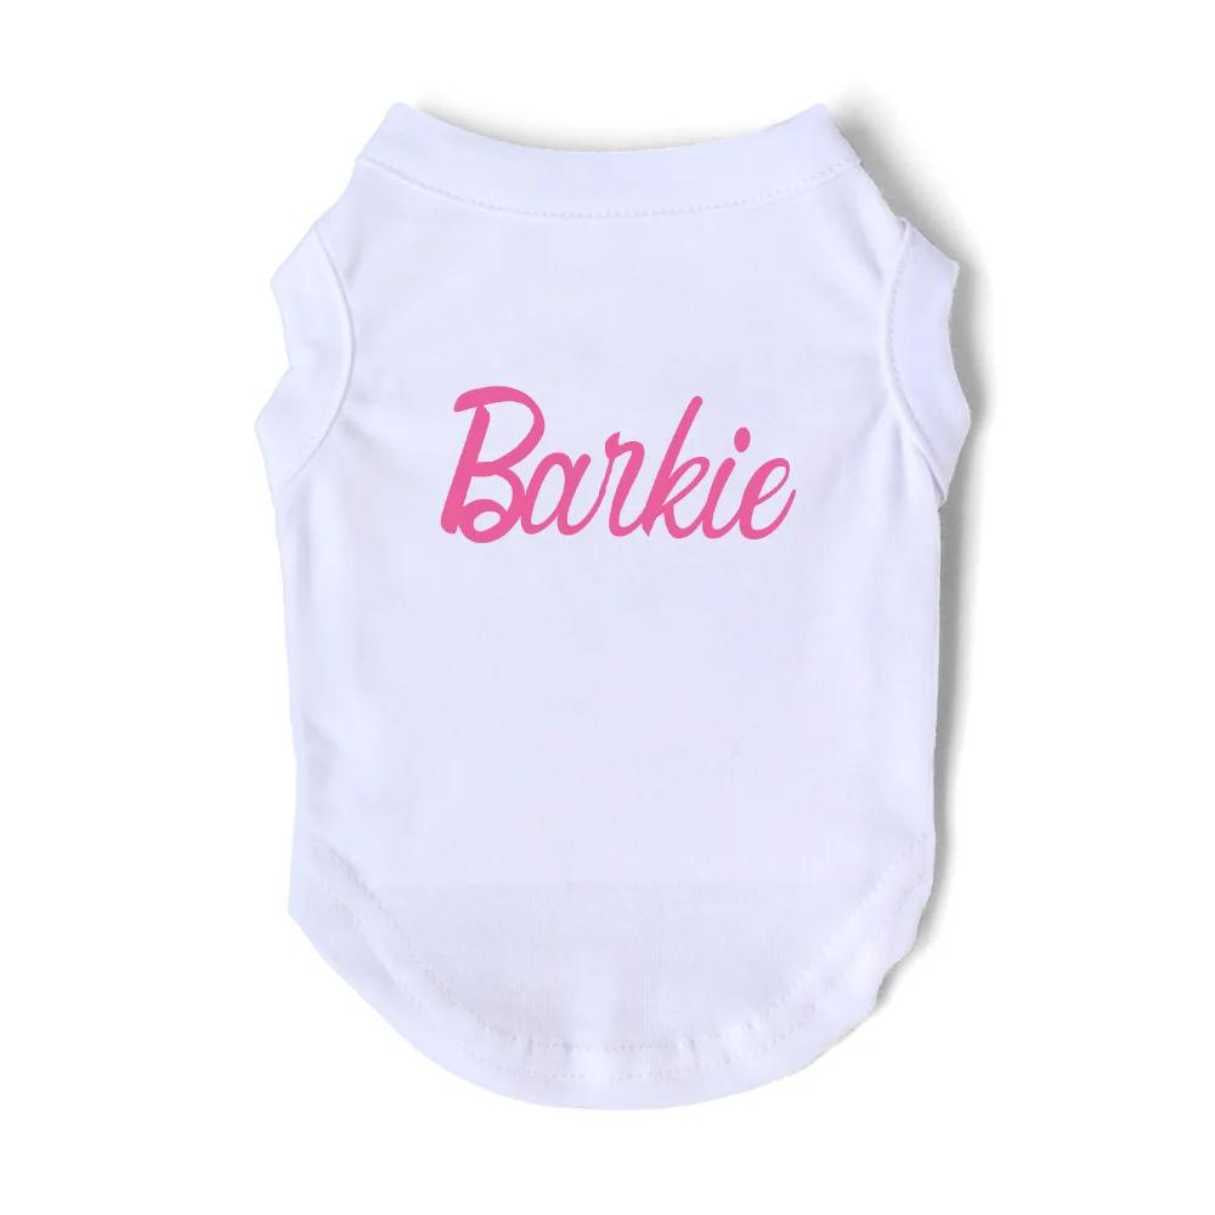 Barkie White tshirt, singlet, sleeveless Dog clothes with pink cursive text